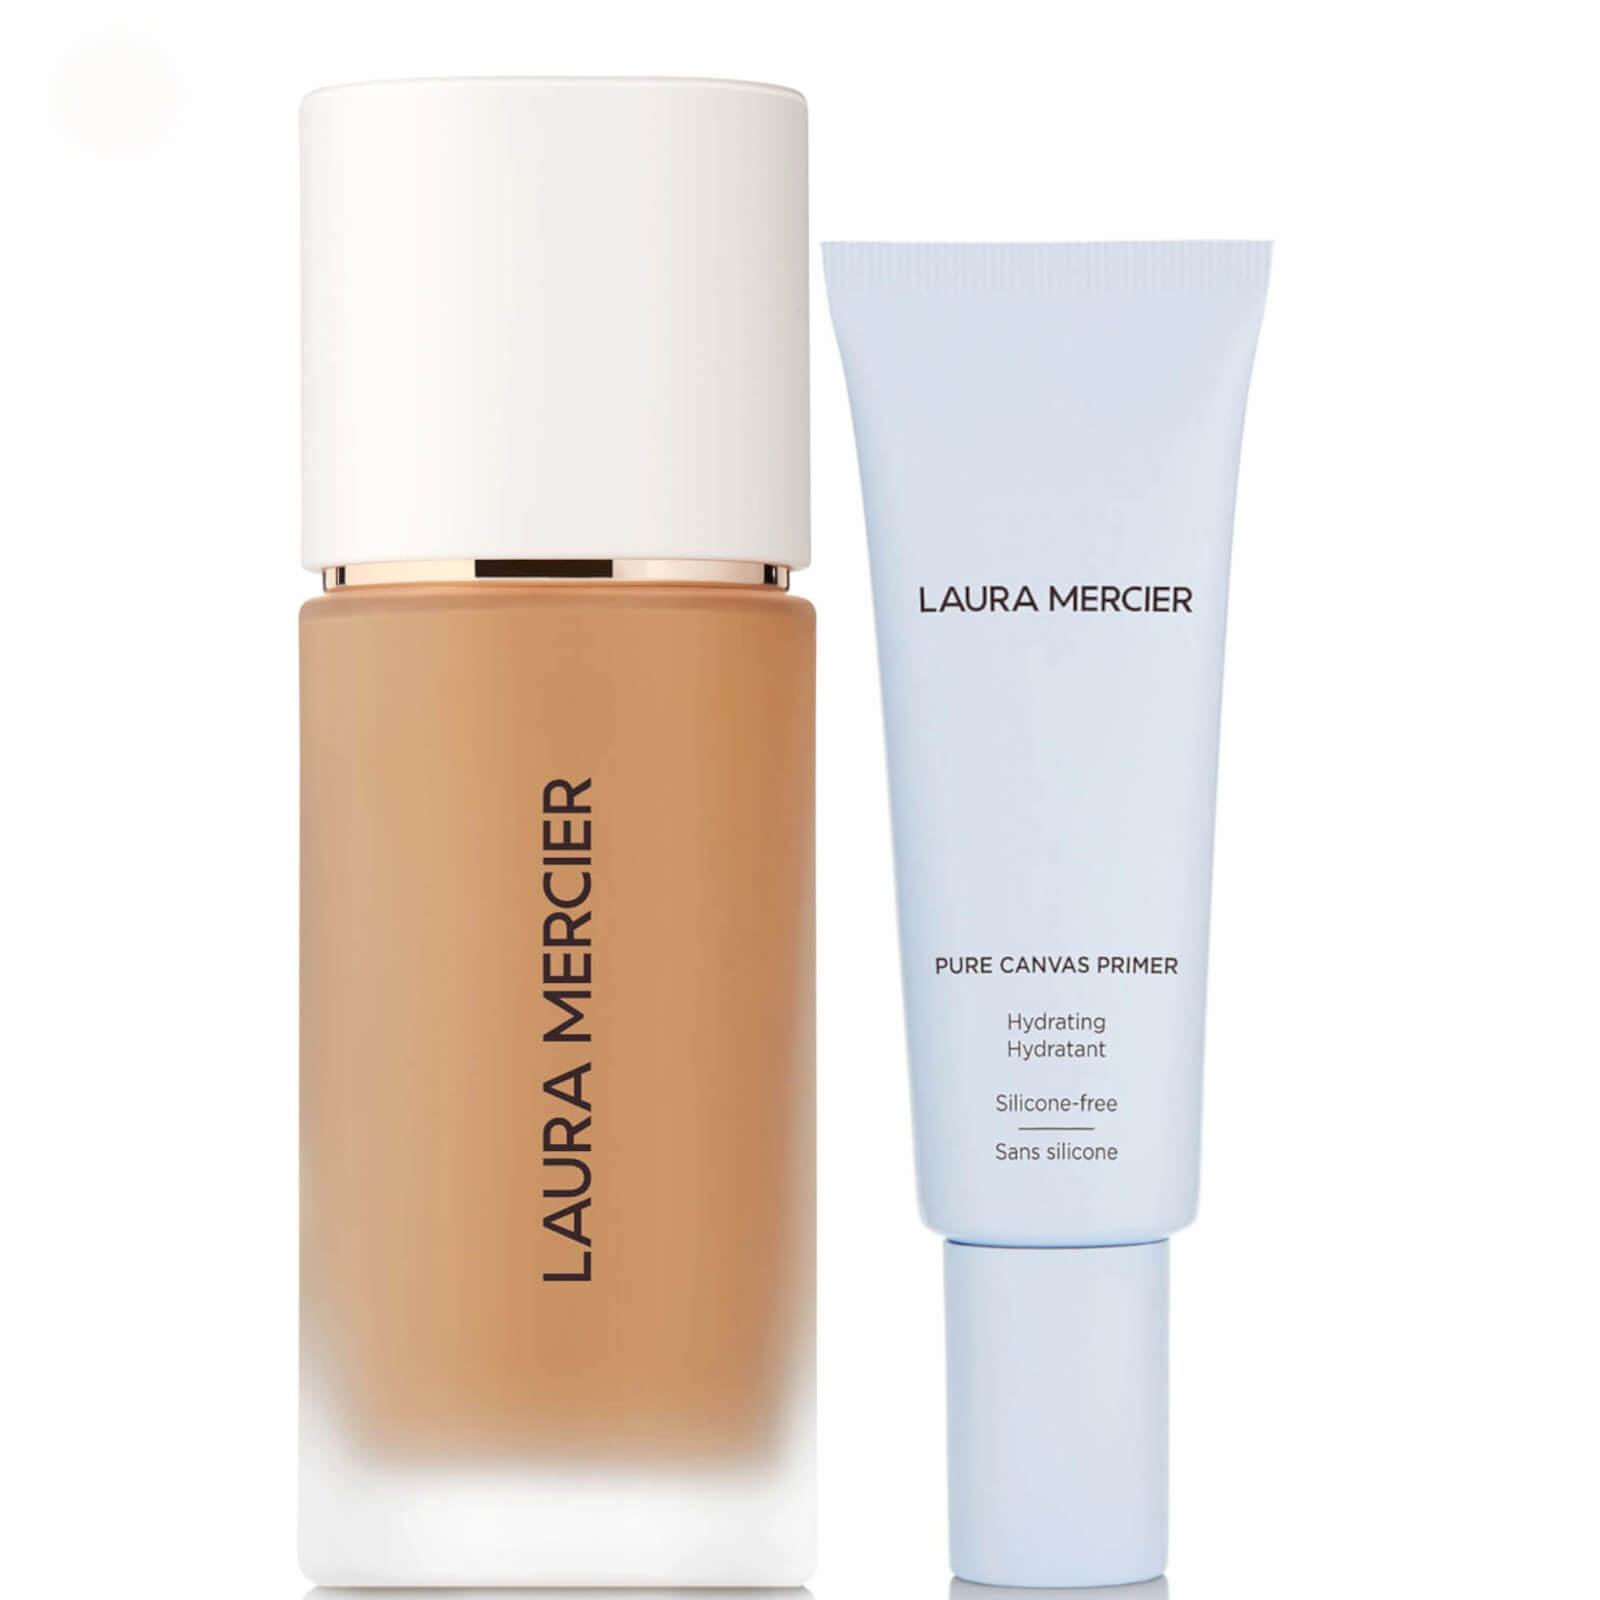 Laura Mercier Real Flawless Foundation and Pure Canvas Hydrating Primer Bundle (Various Shades) - 4W